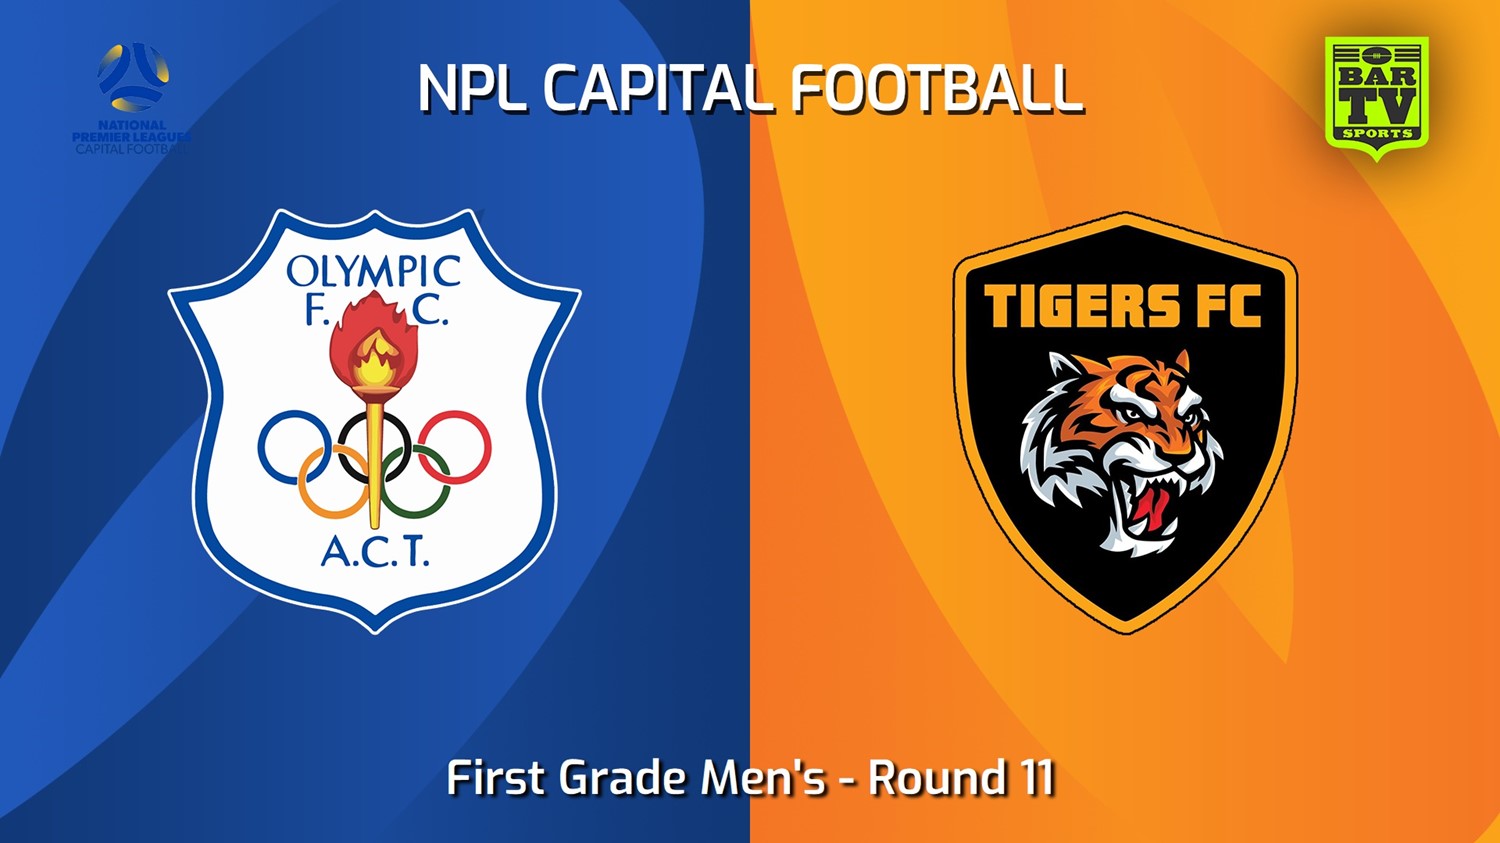 240615-video-Capital NPL Round 11 - Canberra Olympic FC v Tigers FC Minigame Slate Image